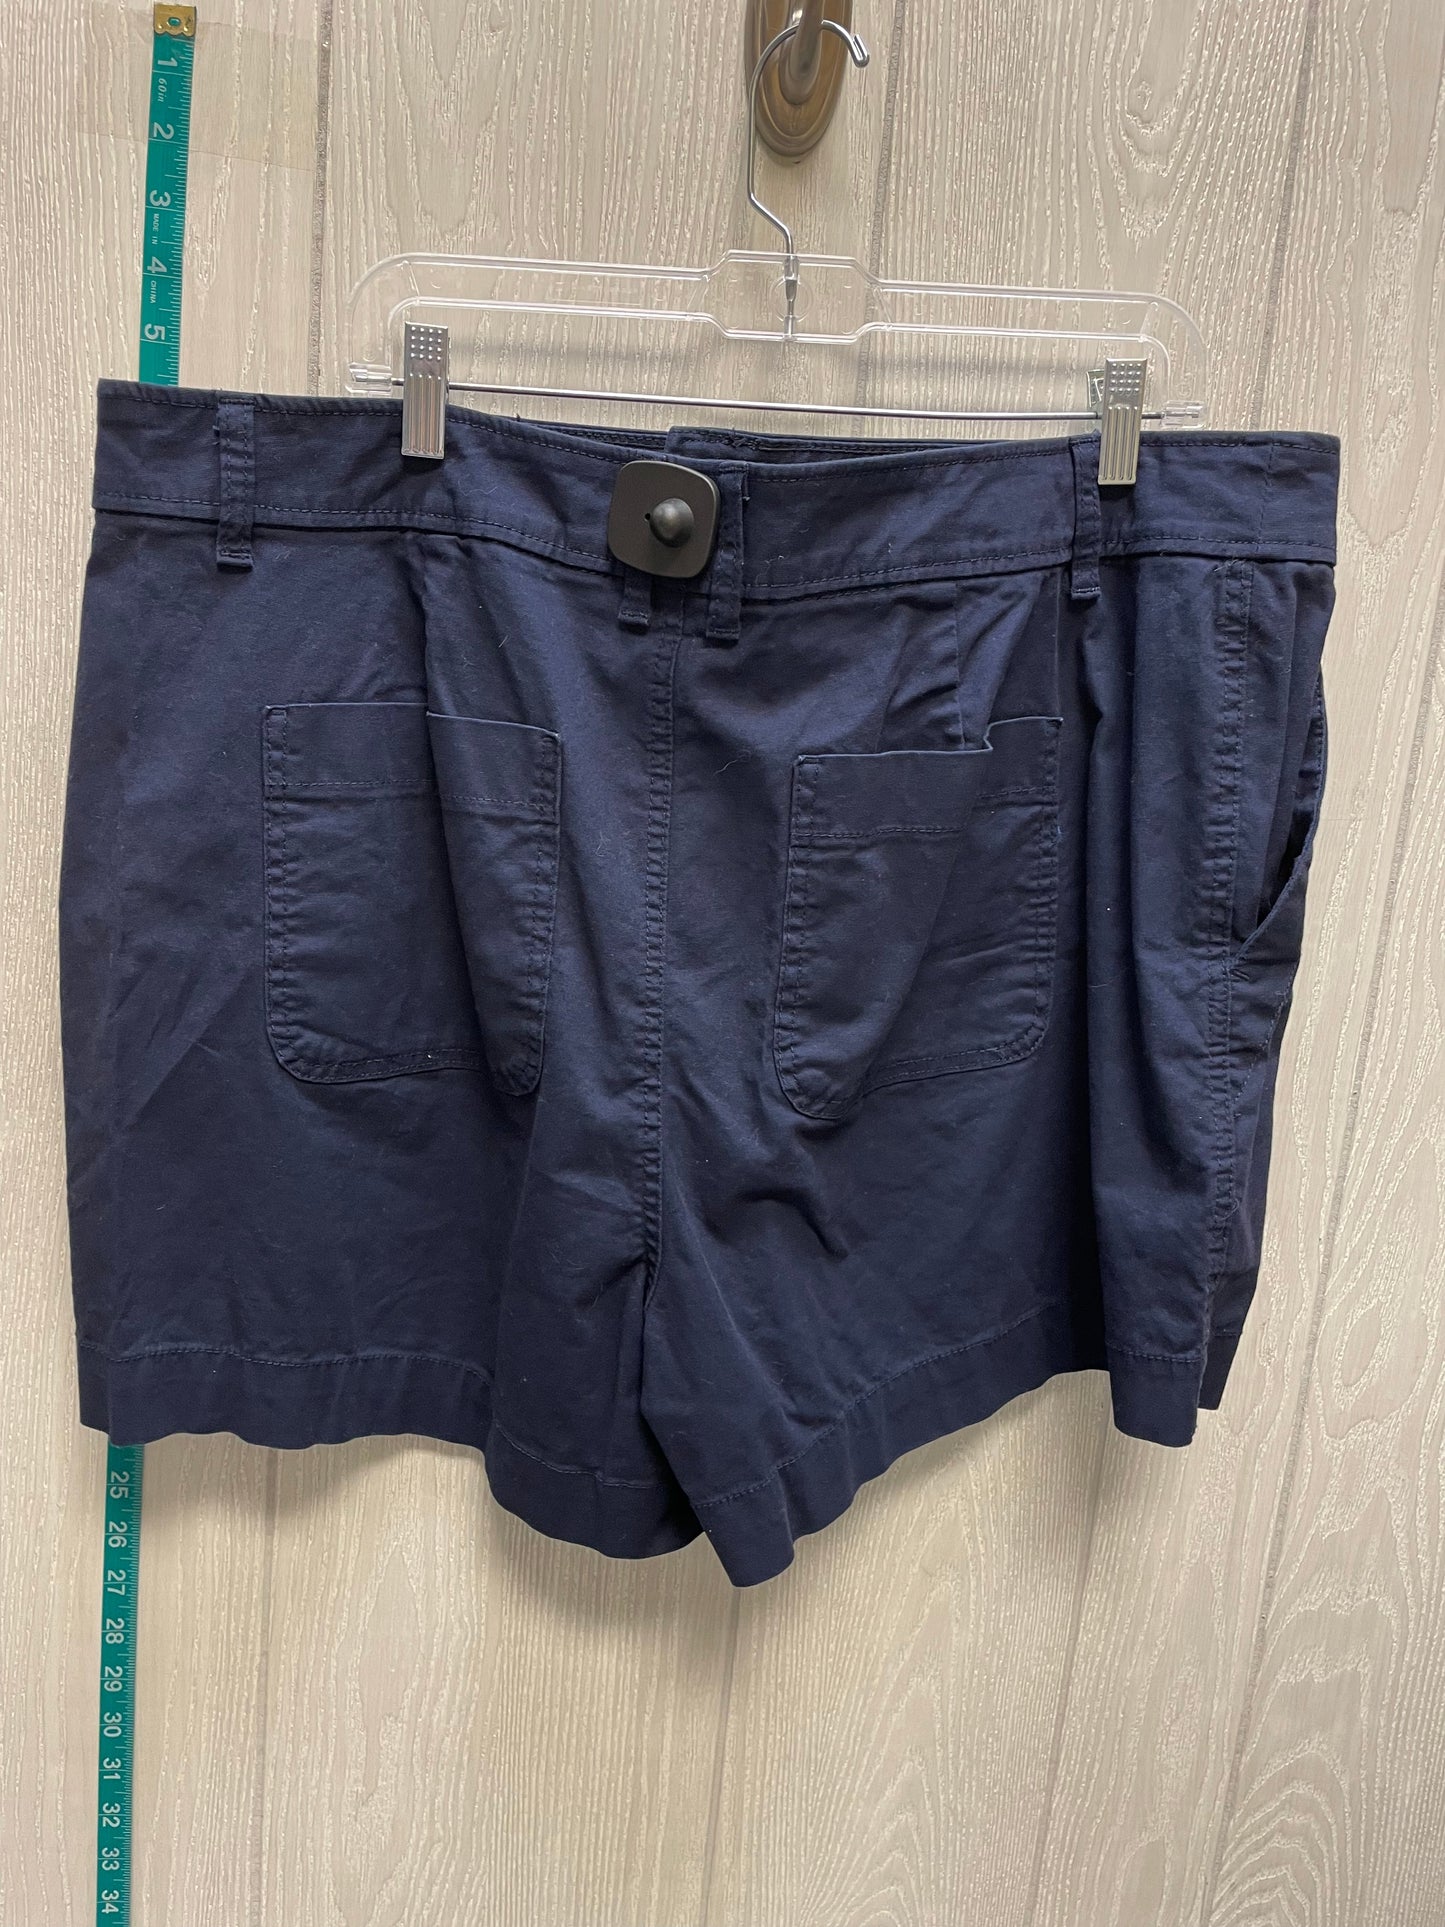 Navy Shorts A New Day, Size 18